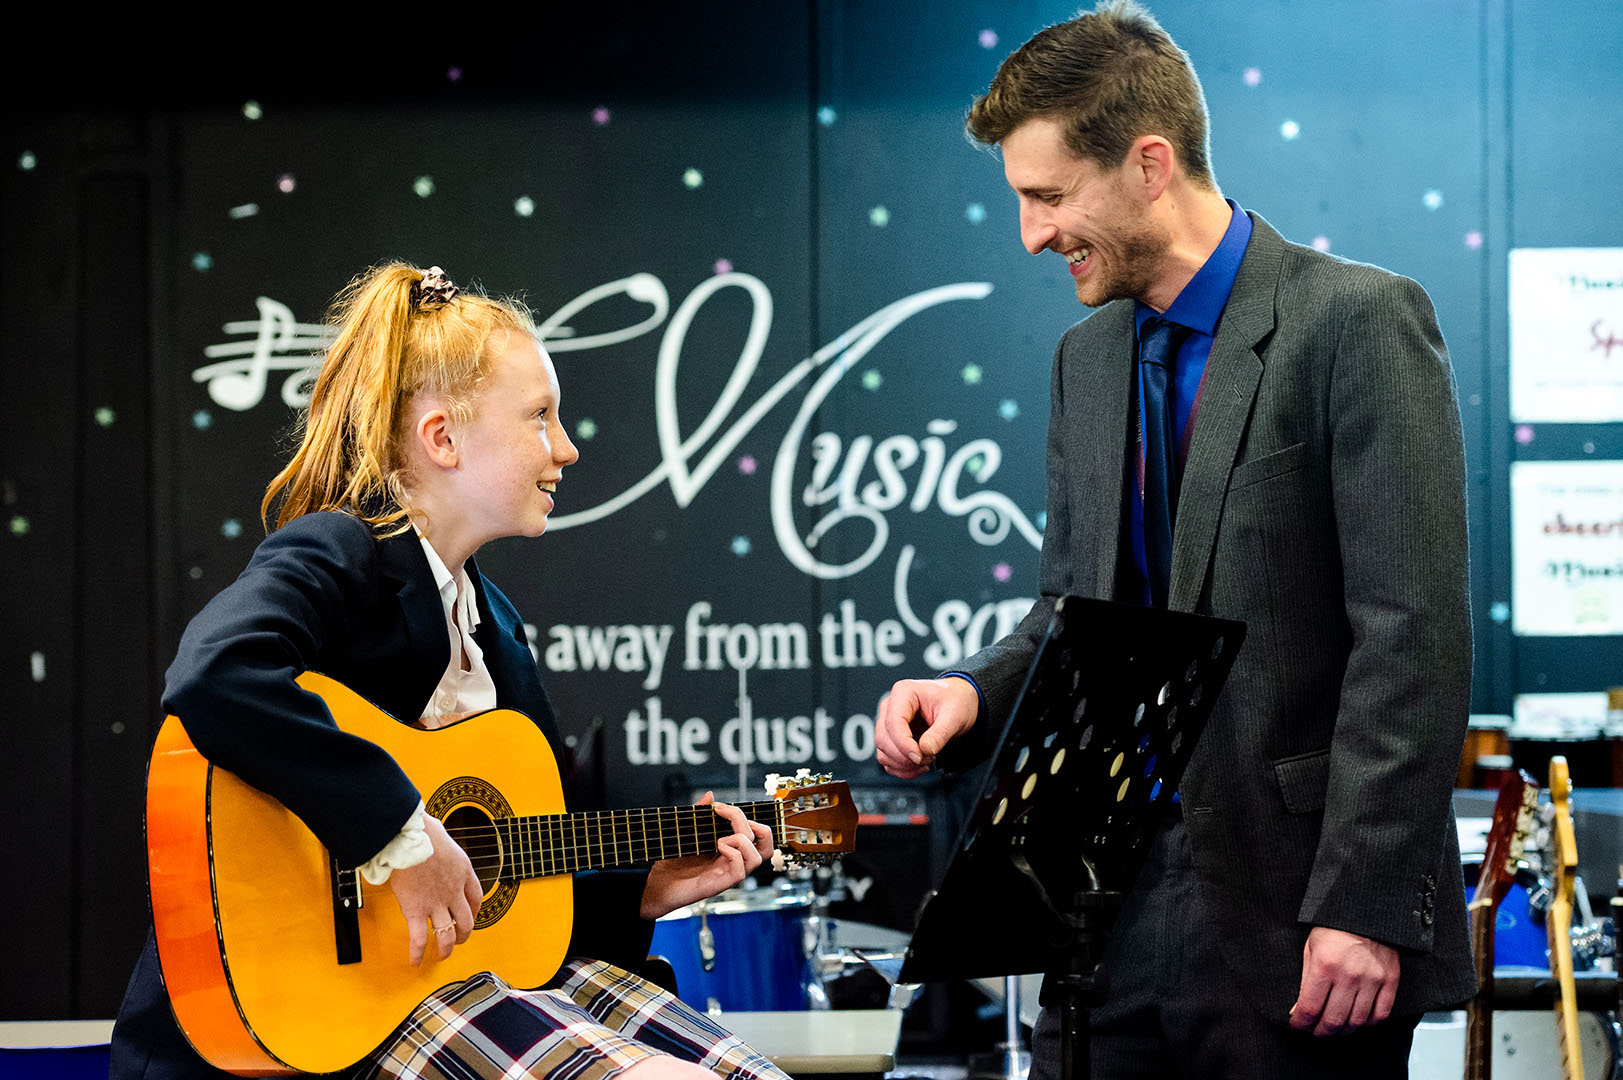 Young female student with guitar and Music teacher smiling in conversation